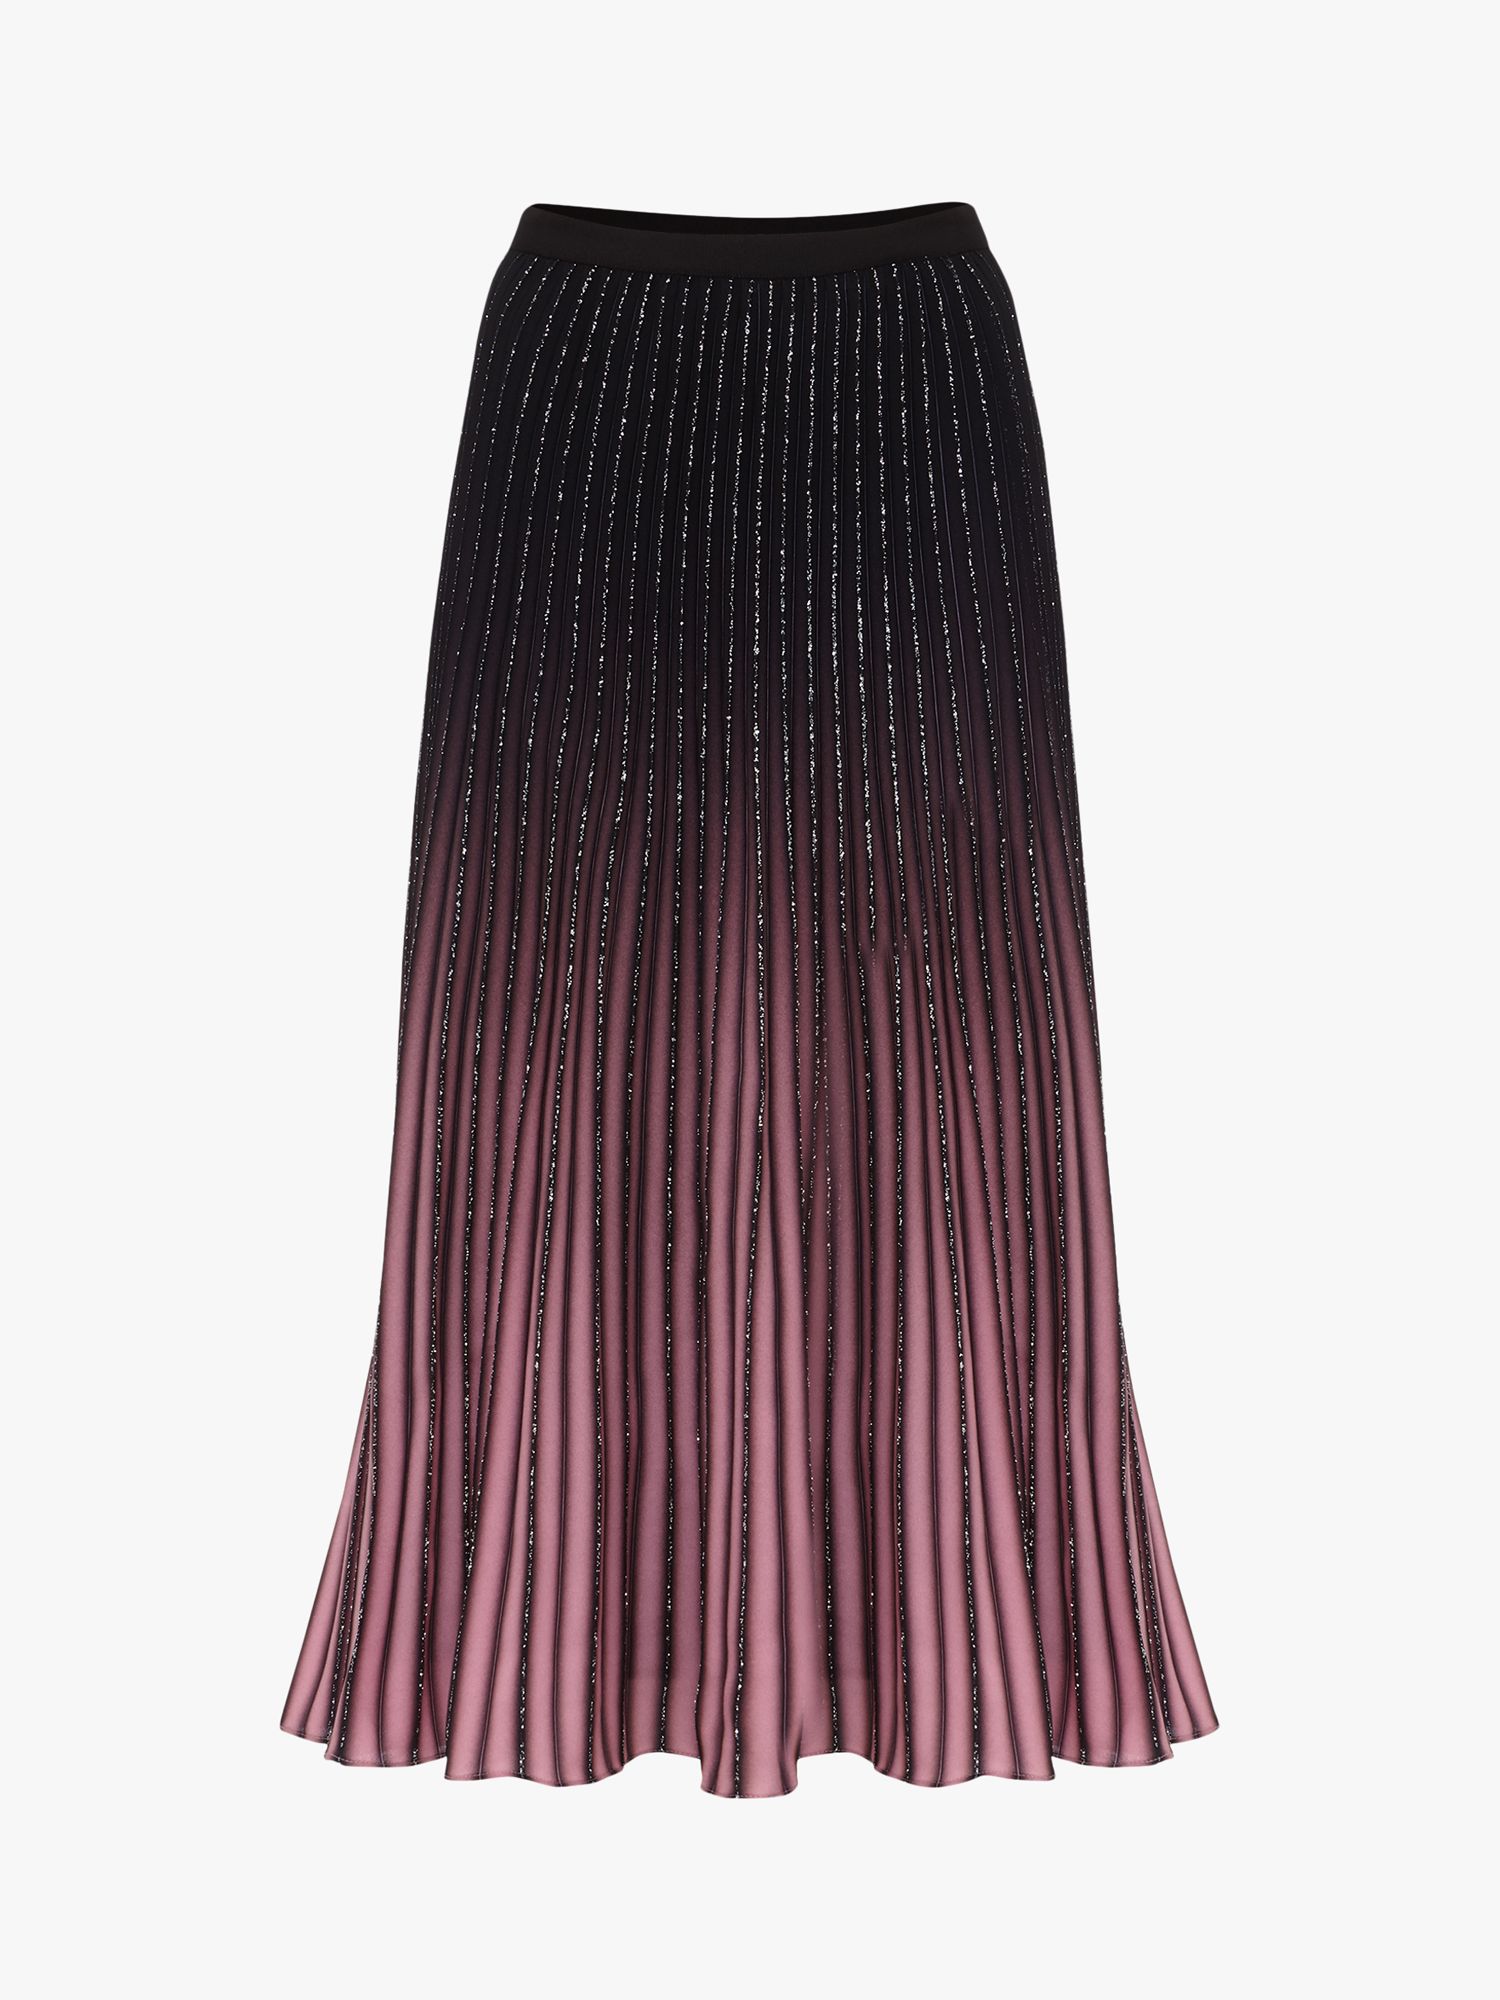 Phase Eight Estella Ombre Pleated Skirt, Pink/Pewter